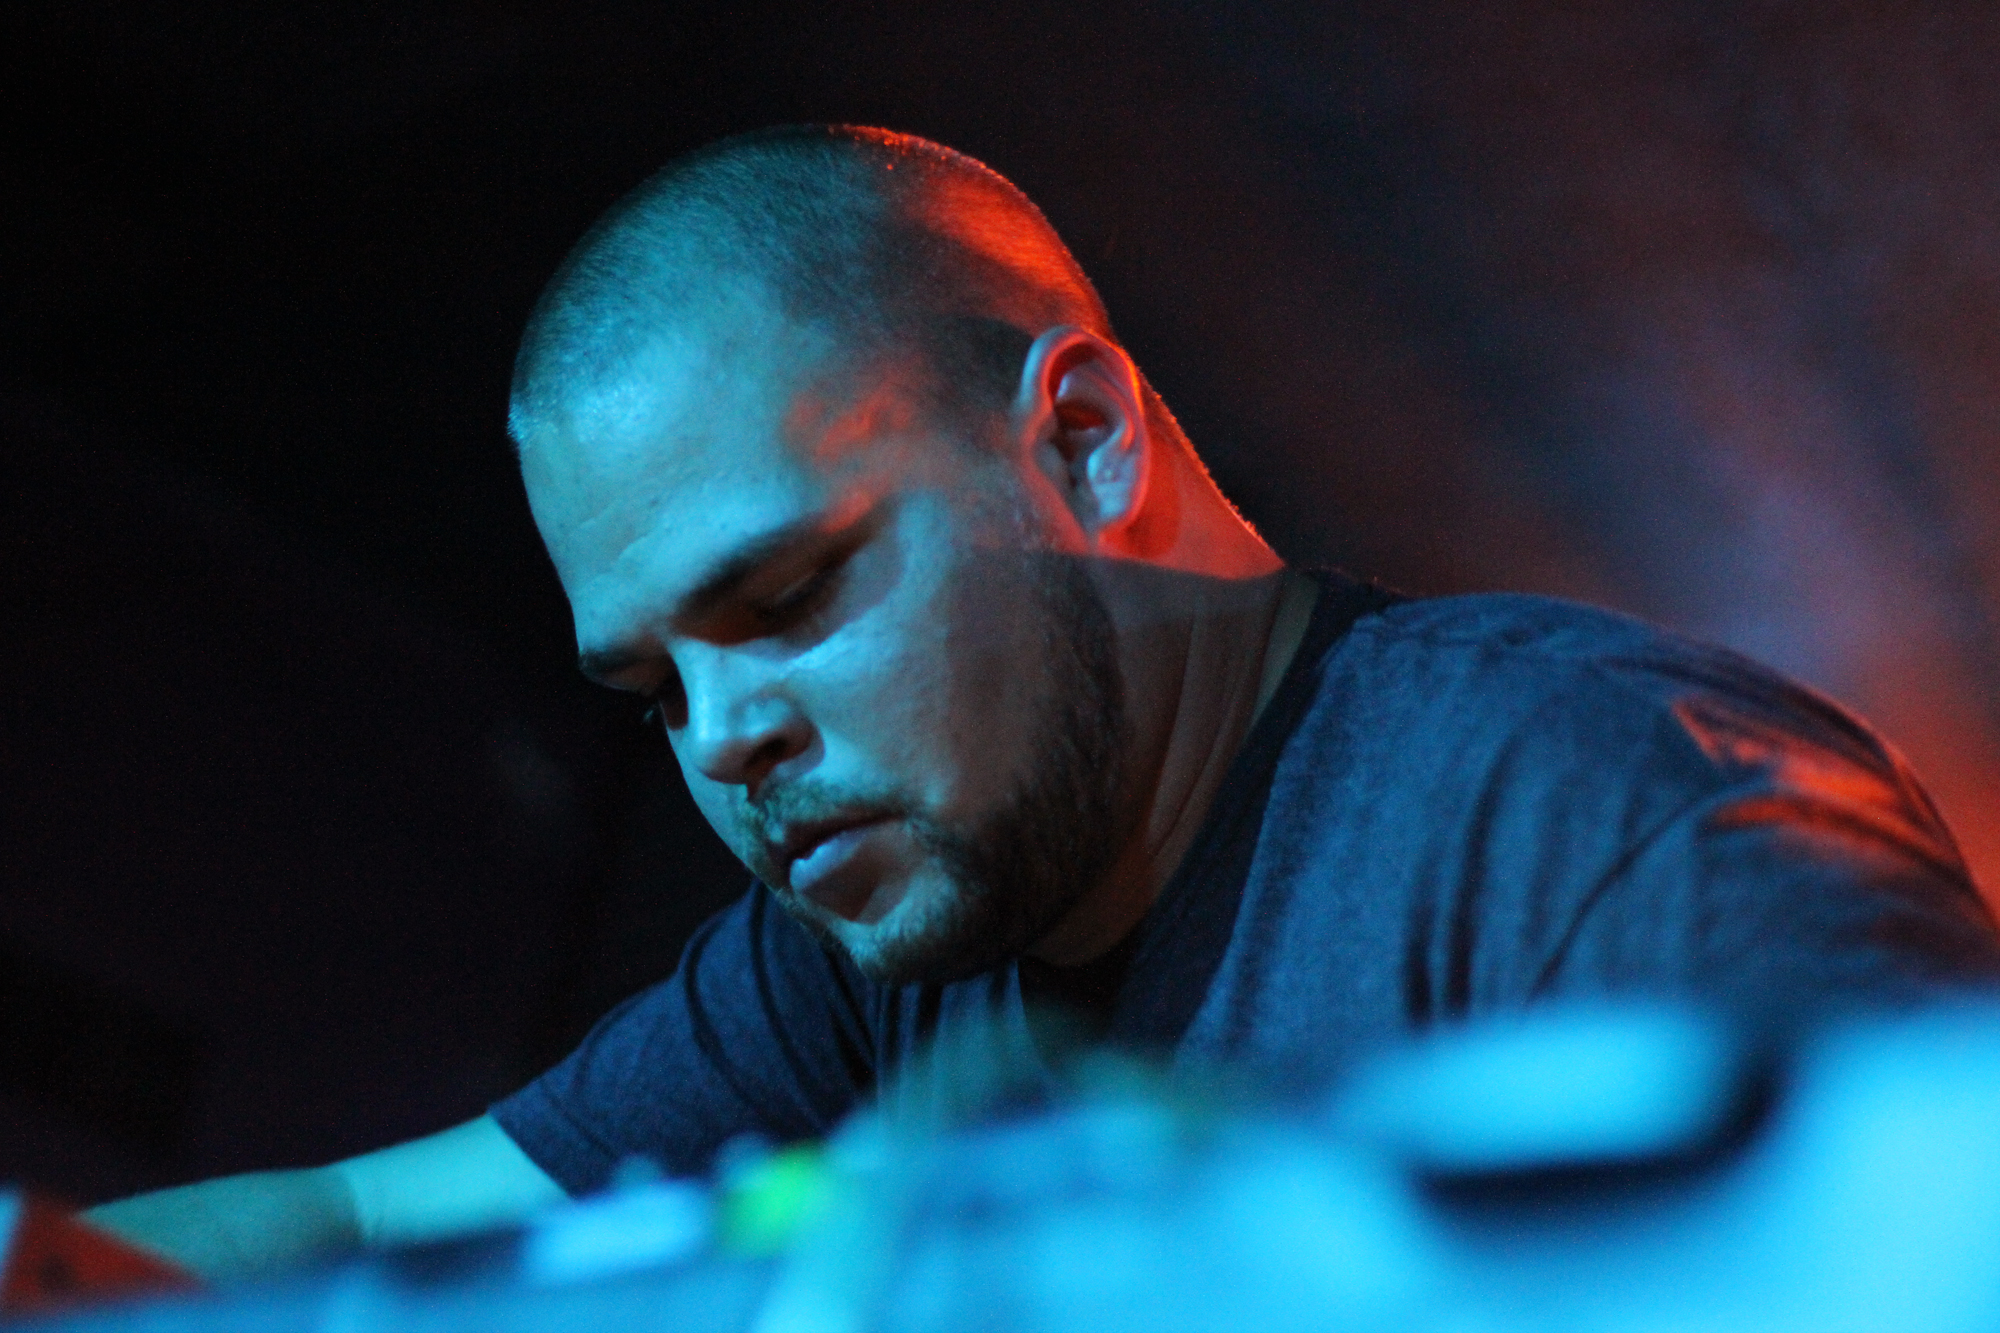 Com Truise performs at Rock and Roll Hotel in Washington, D.C. on Sept. 15, 2011.